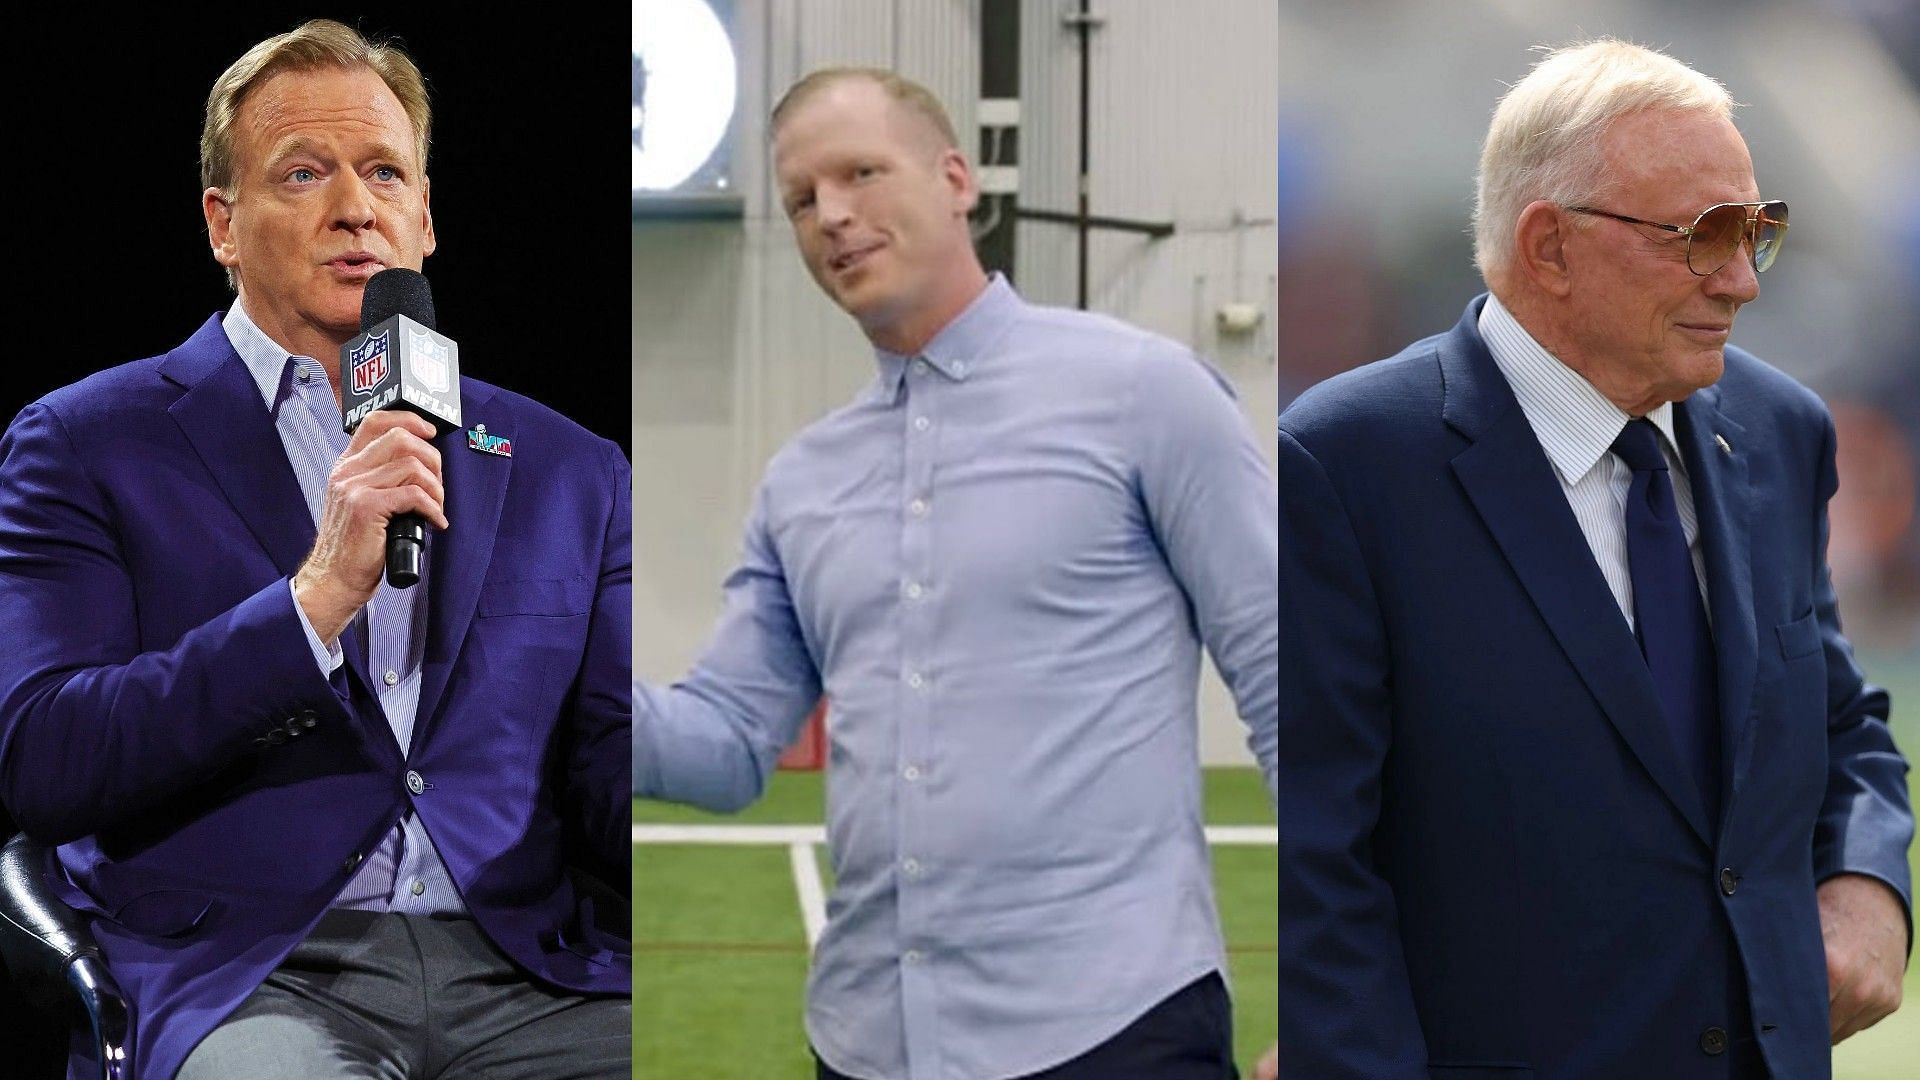 Roger Goodell and owners including Jerry Jones get ripped by Chris Simms - Courtesy of Chris Simms on Instagram